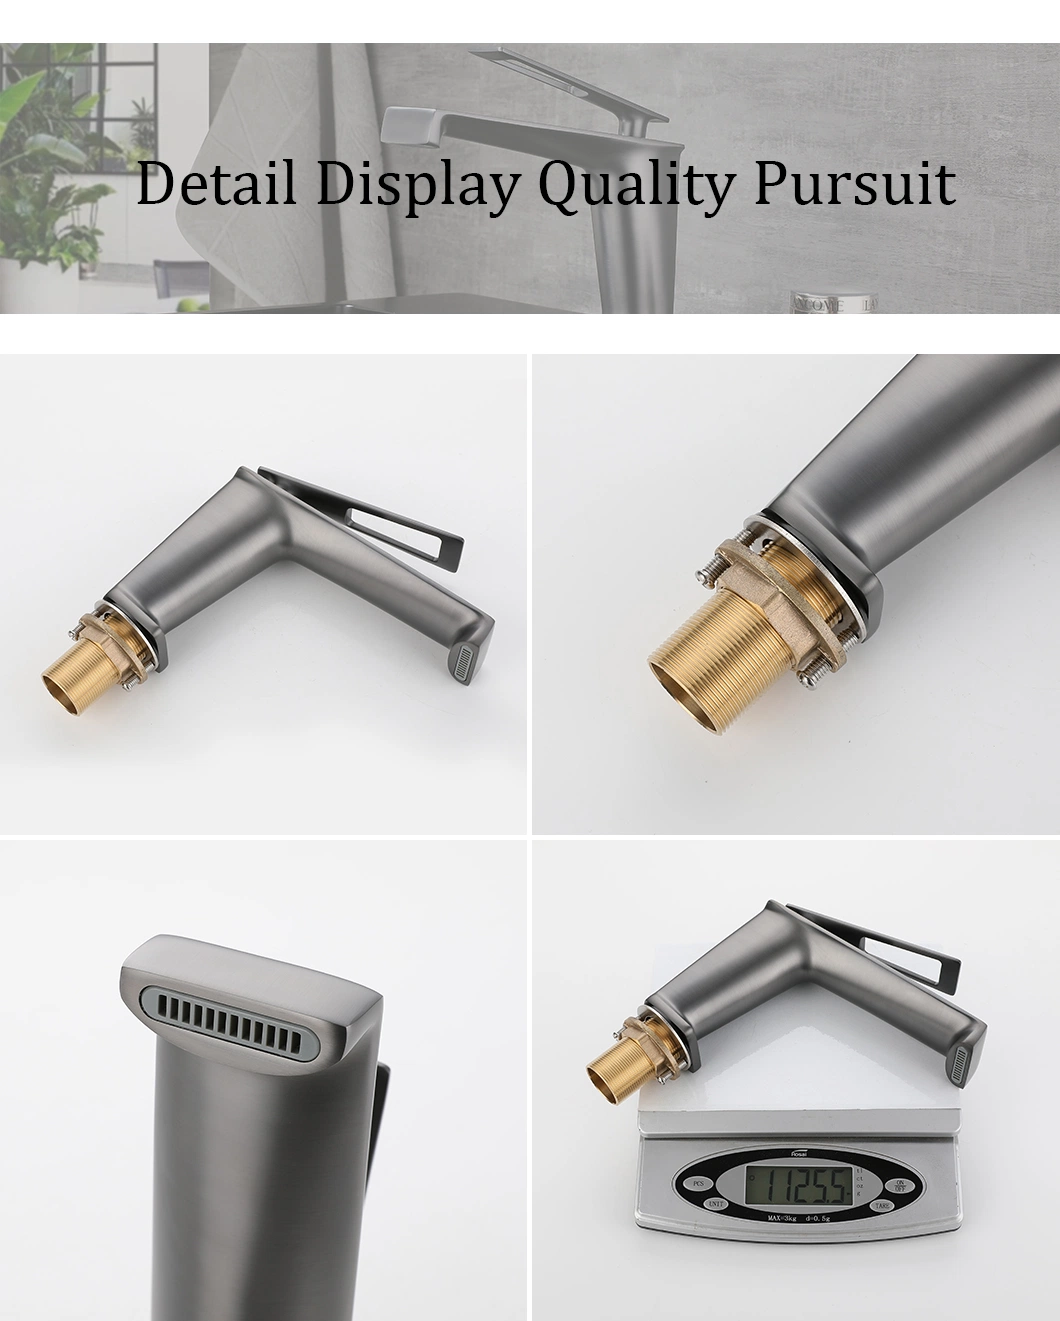 Ablinox Stainless Steel Precision Casting Bathroom Stainless Steel Basin Faucet